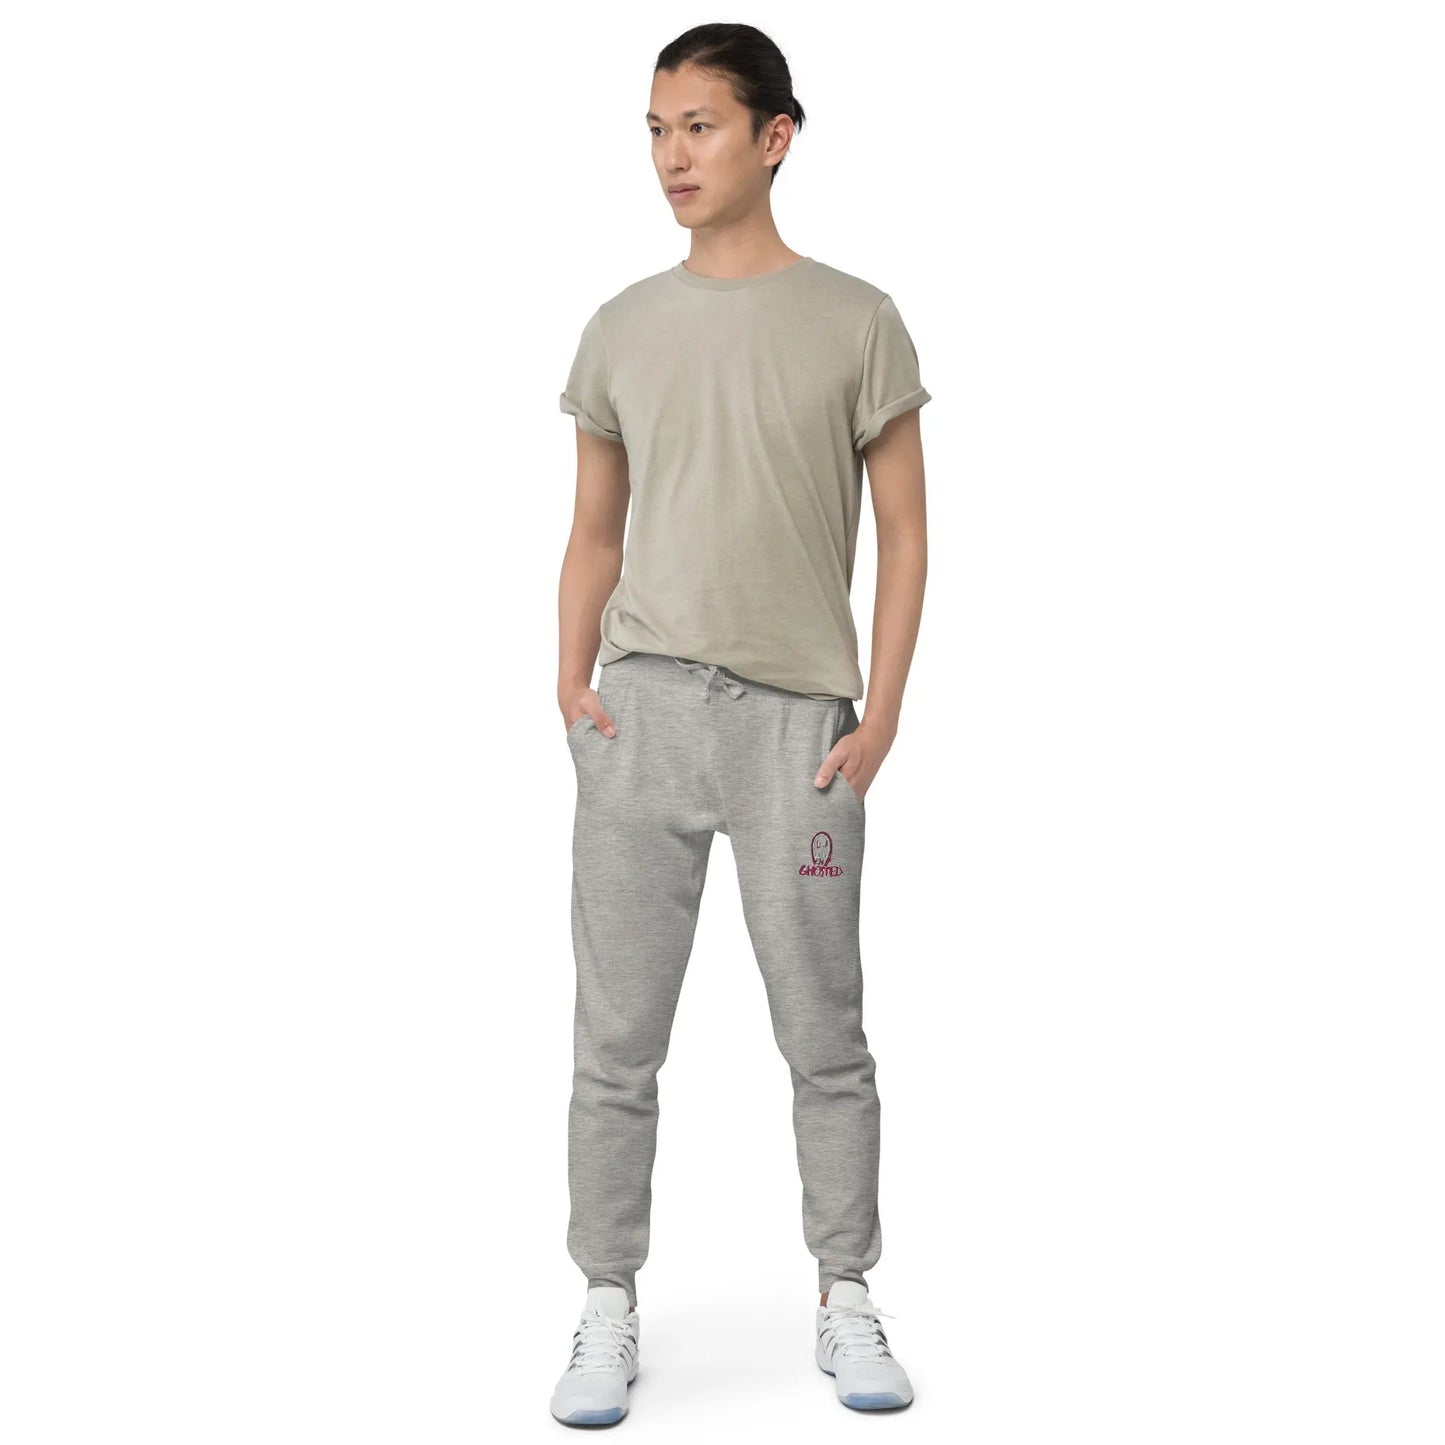 Ghosted Sweatpants - Image #10